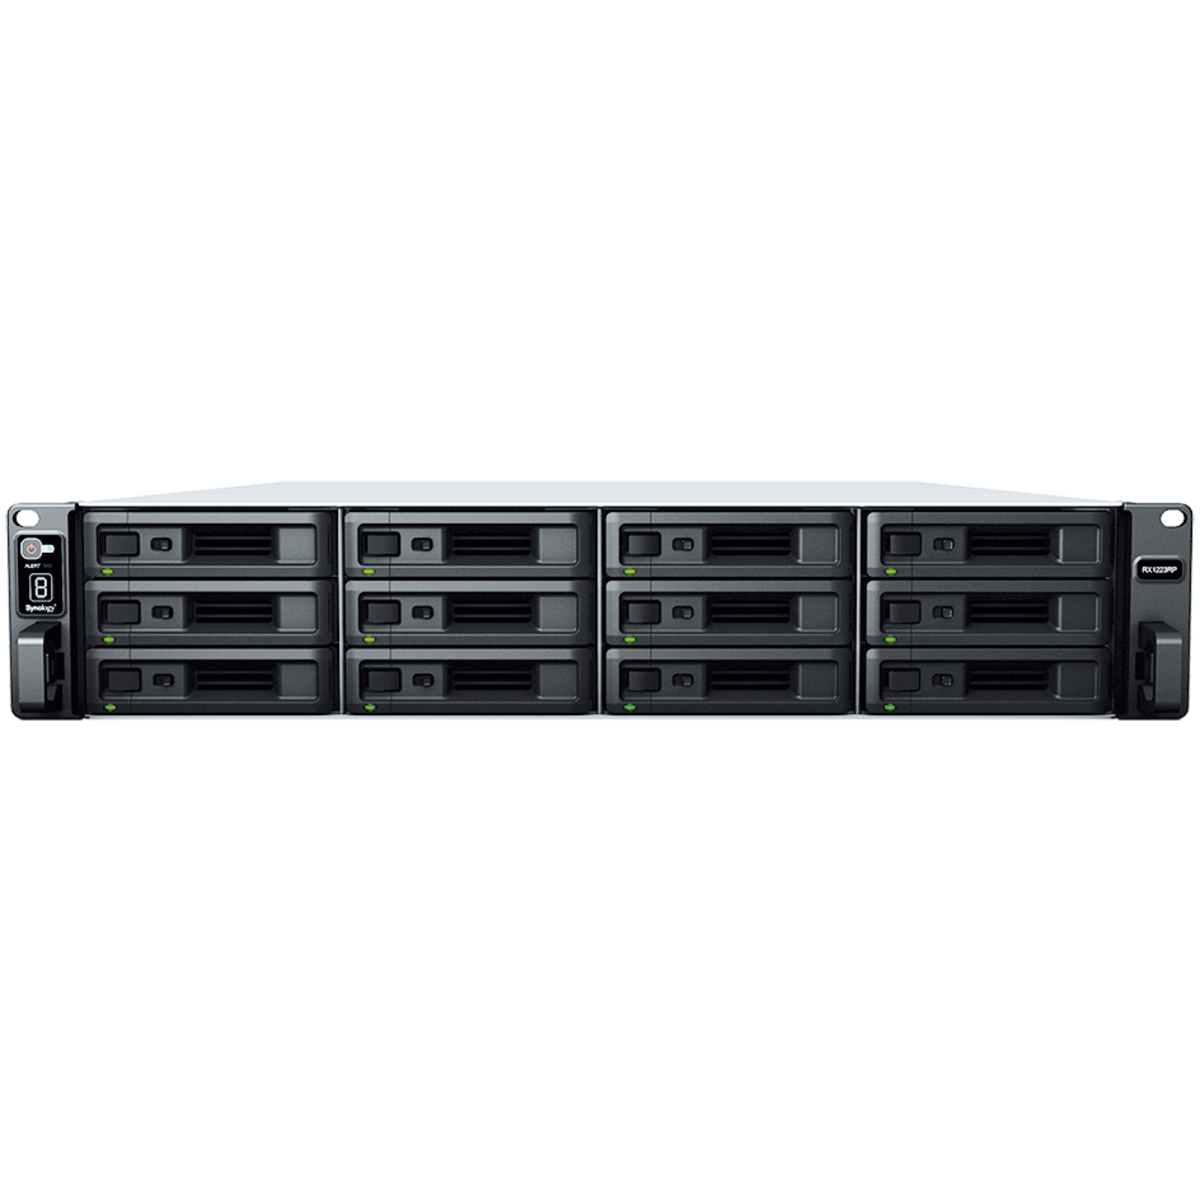 Synology RX1223RP External Expansion Drive 6tb 12-Bay RackMount Large Business / Enterprise Expansion Enclosure 12x500gb Crucial MX500 CT500MX500SSD1 2.5 560/510MB/s SATA 6Gb/s SSD CONSUMER Class Drives Installed - Burn-In Tested RX1223RP External Expansion Drive